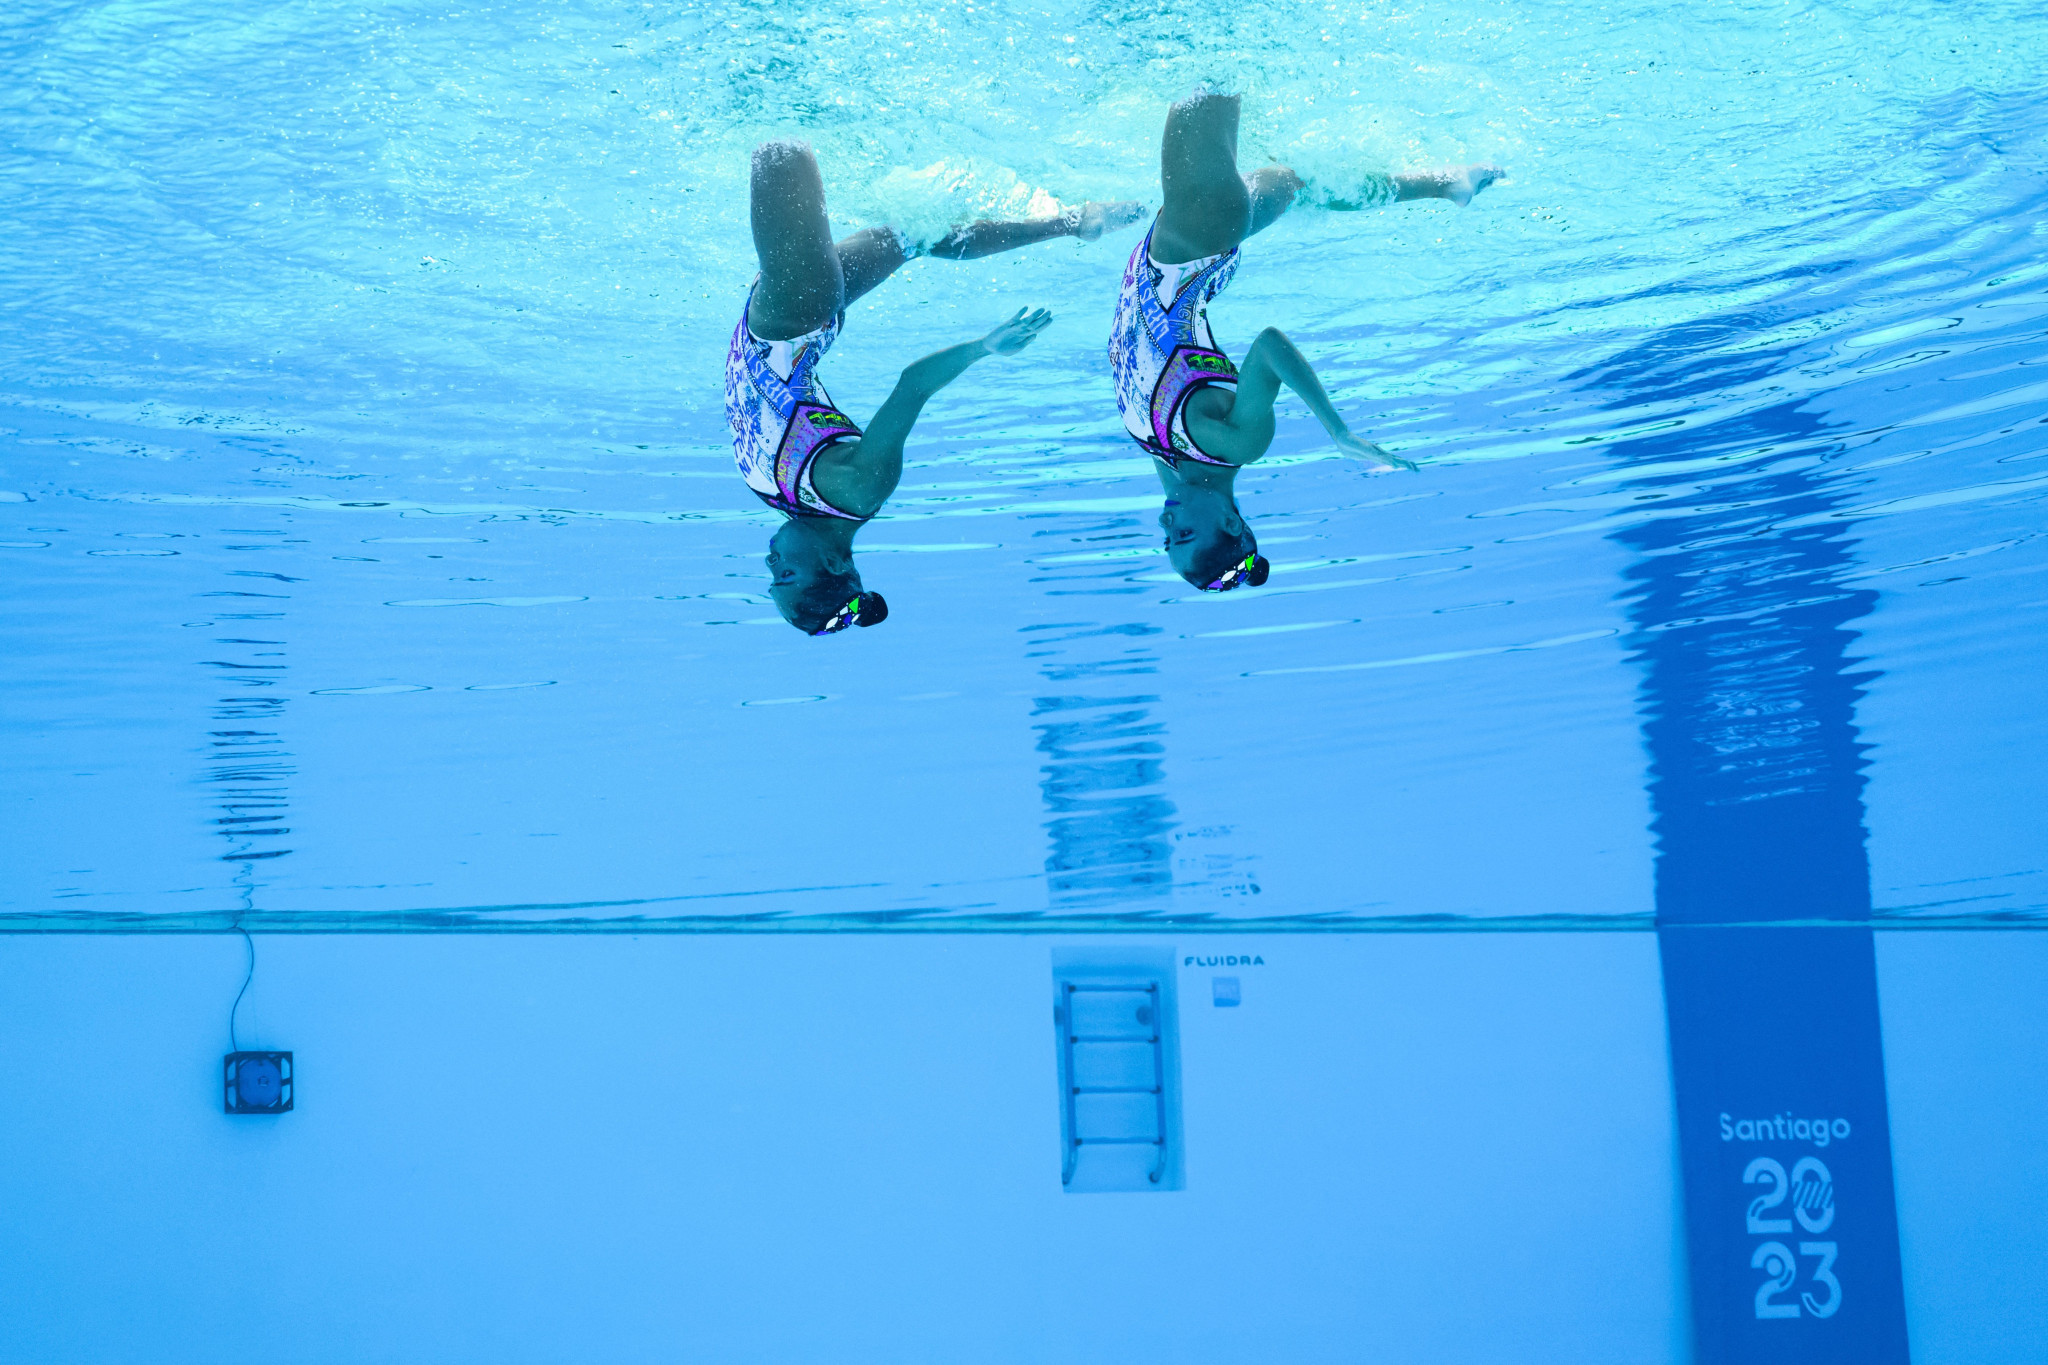 Nuria Diosdado and Joana Jimenez compete during the artistic swimming duets technical routine event of the Pan American Games Santiago 2023 © Getty Images